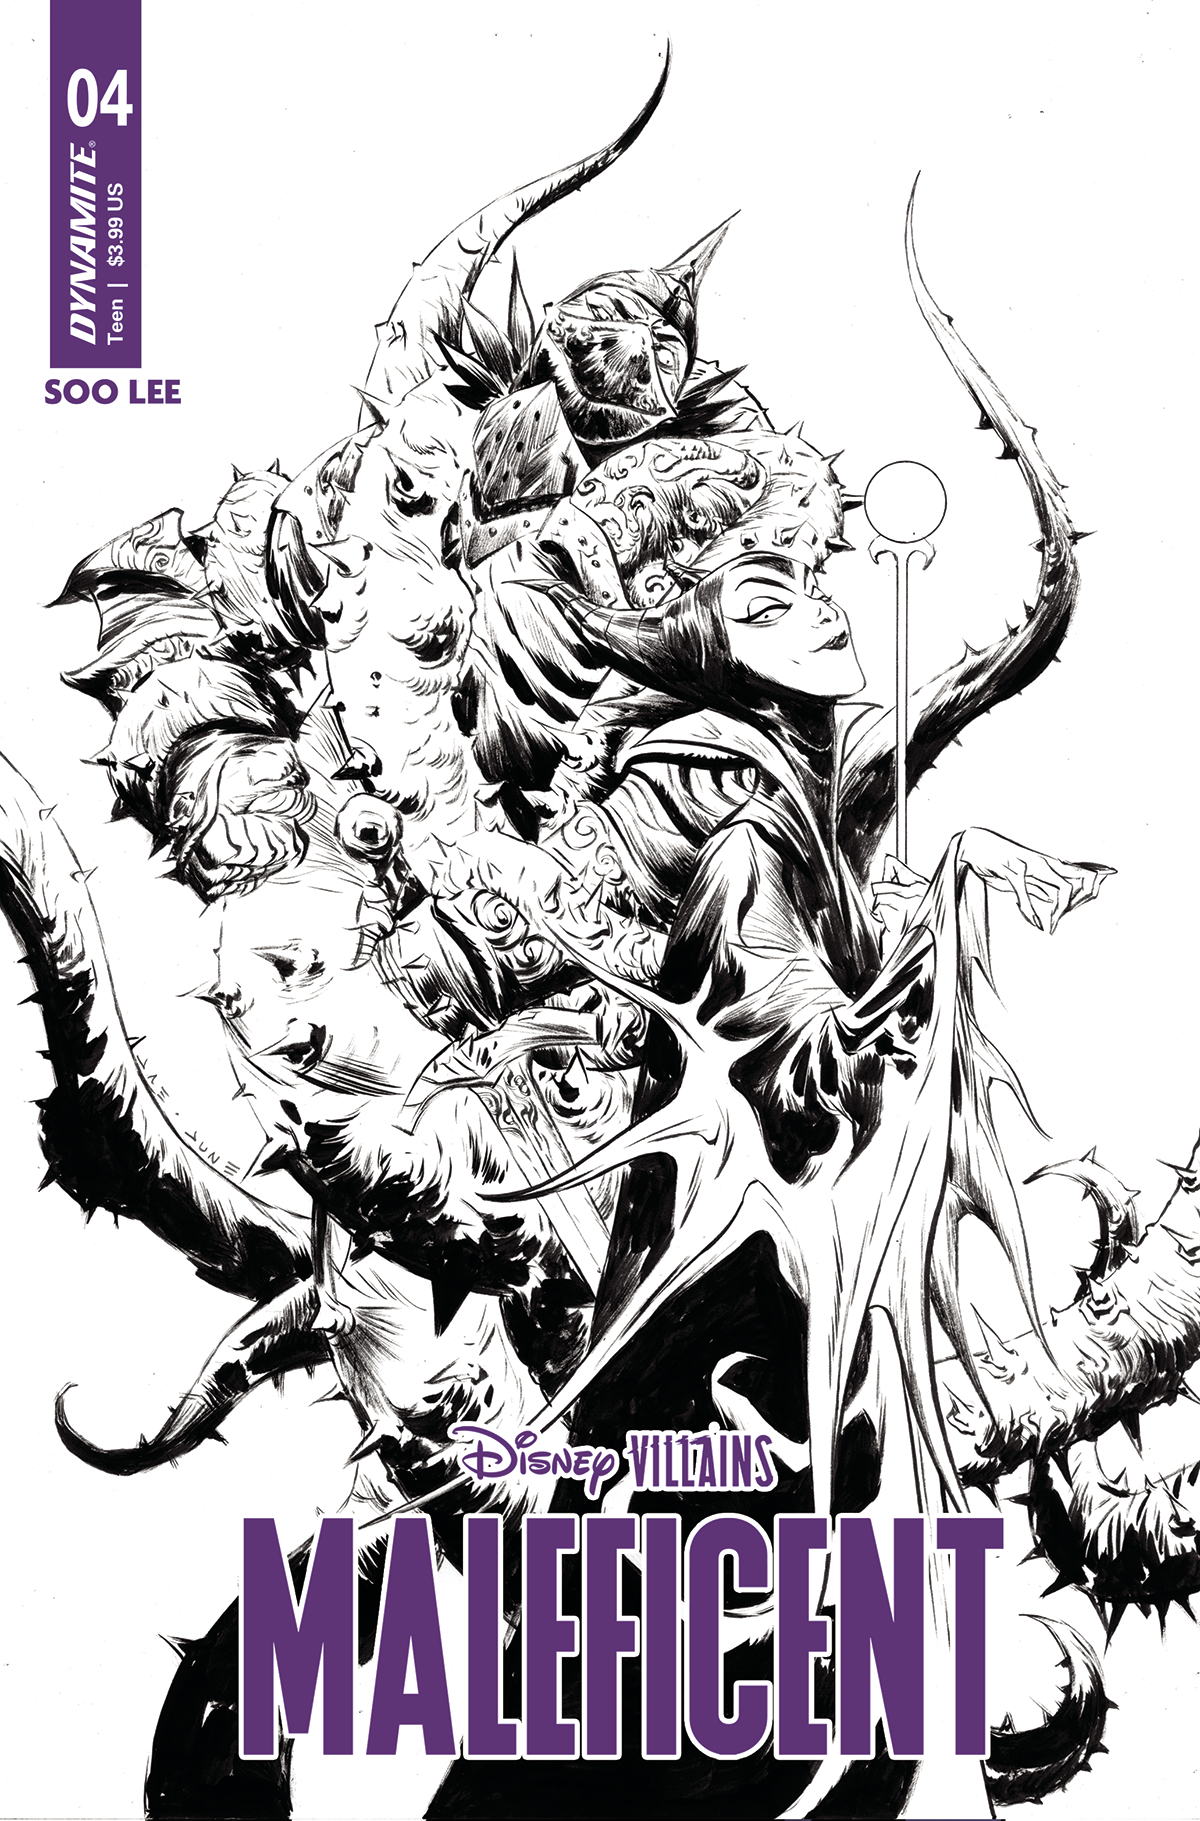 Disney Villains Maleficent #4 Cover F 1 for 10 Incentive Soo Lee Black & White